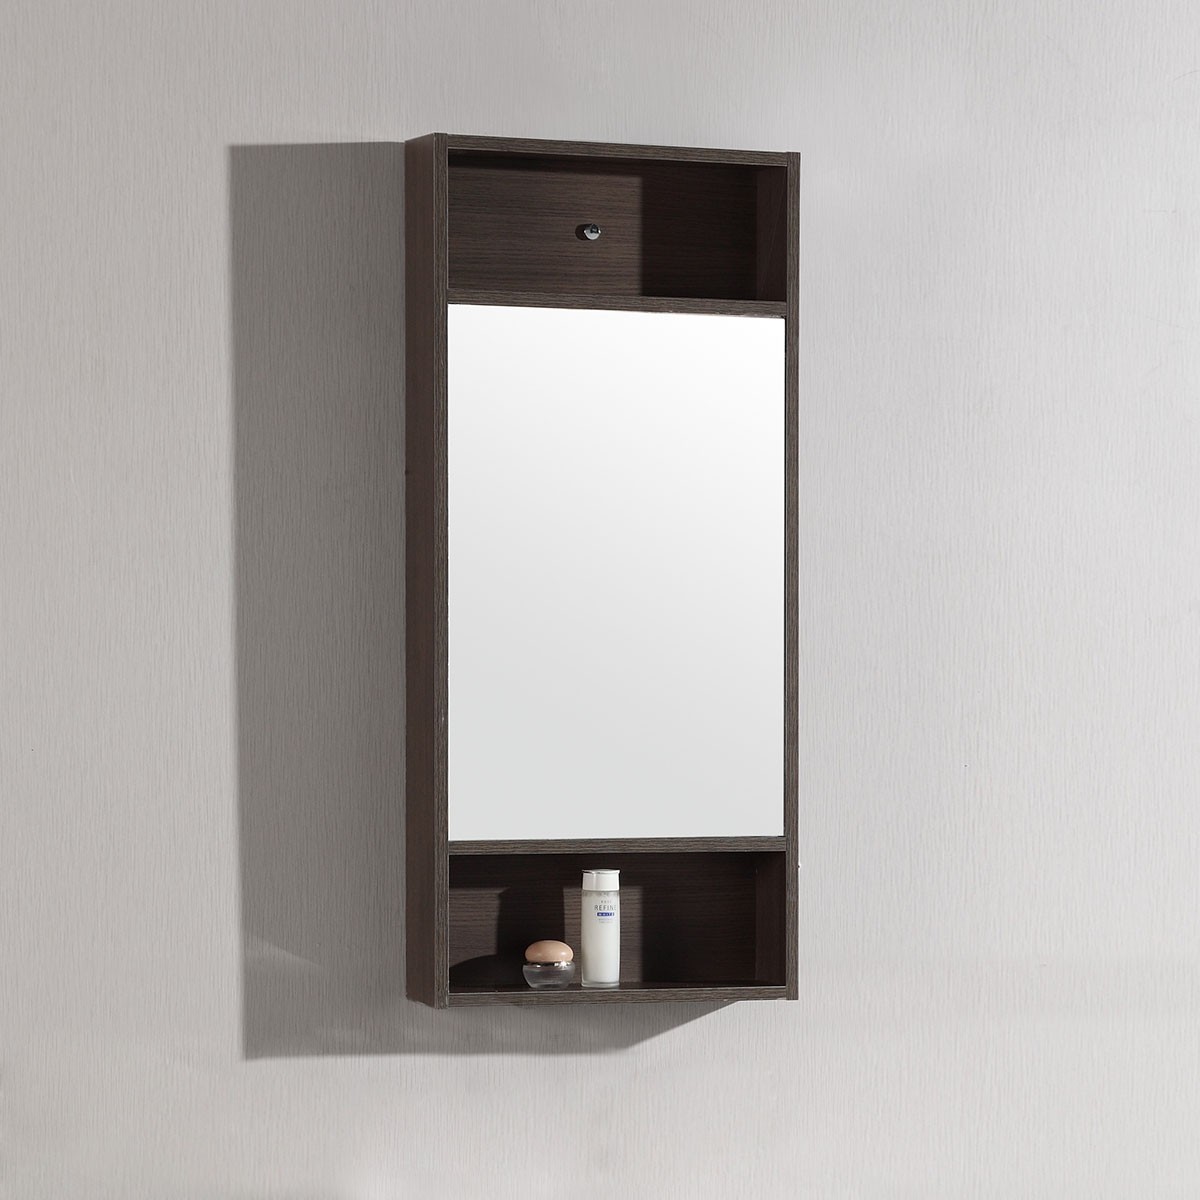 18 x 28 In. Mirror with Brown Frame (DK-TH20160A-M)